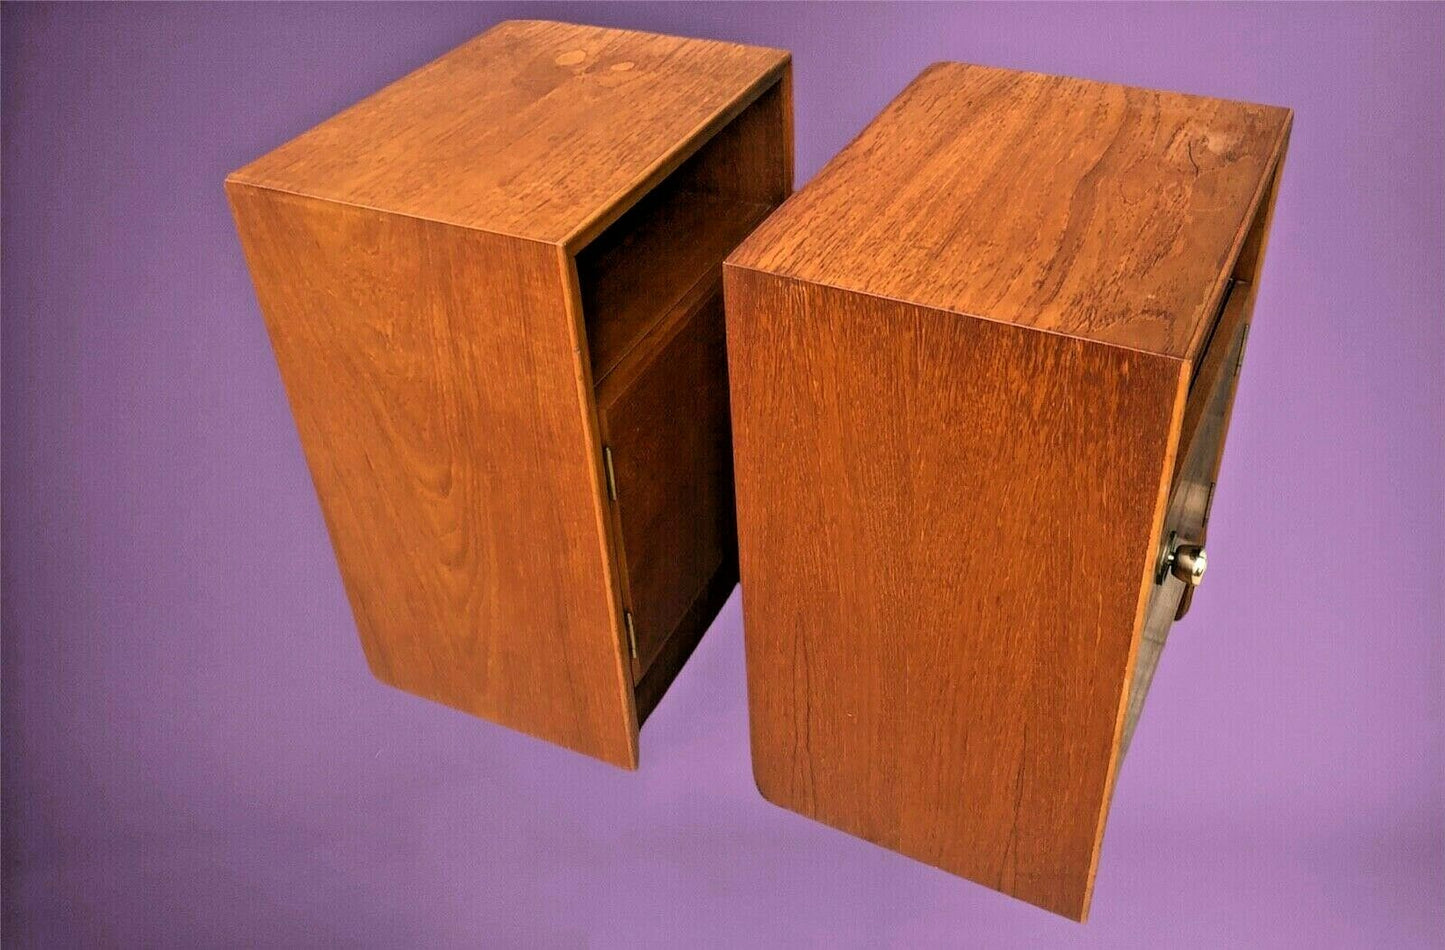 A Pair Of Retro Teak Bedside Cabinets By Meredew ( SOLD )